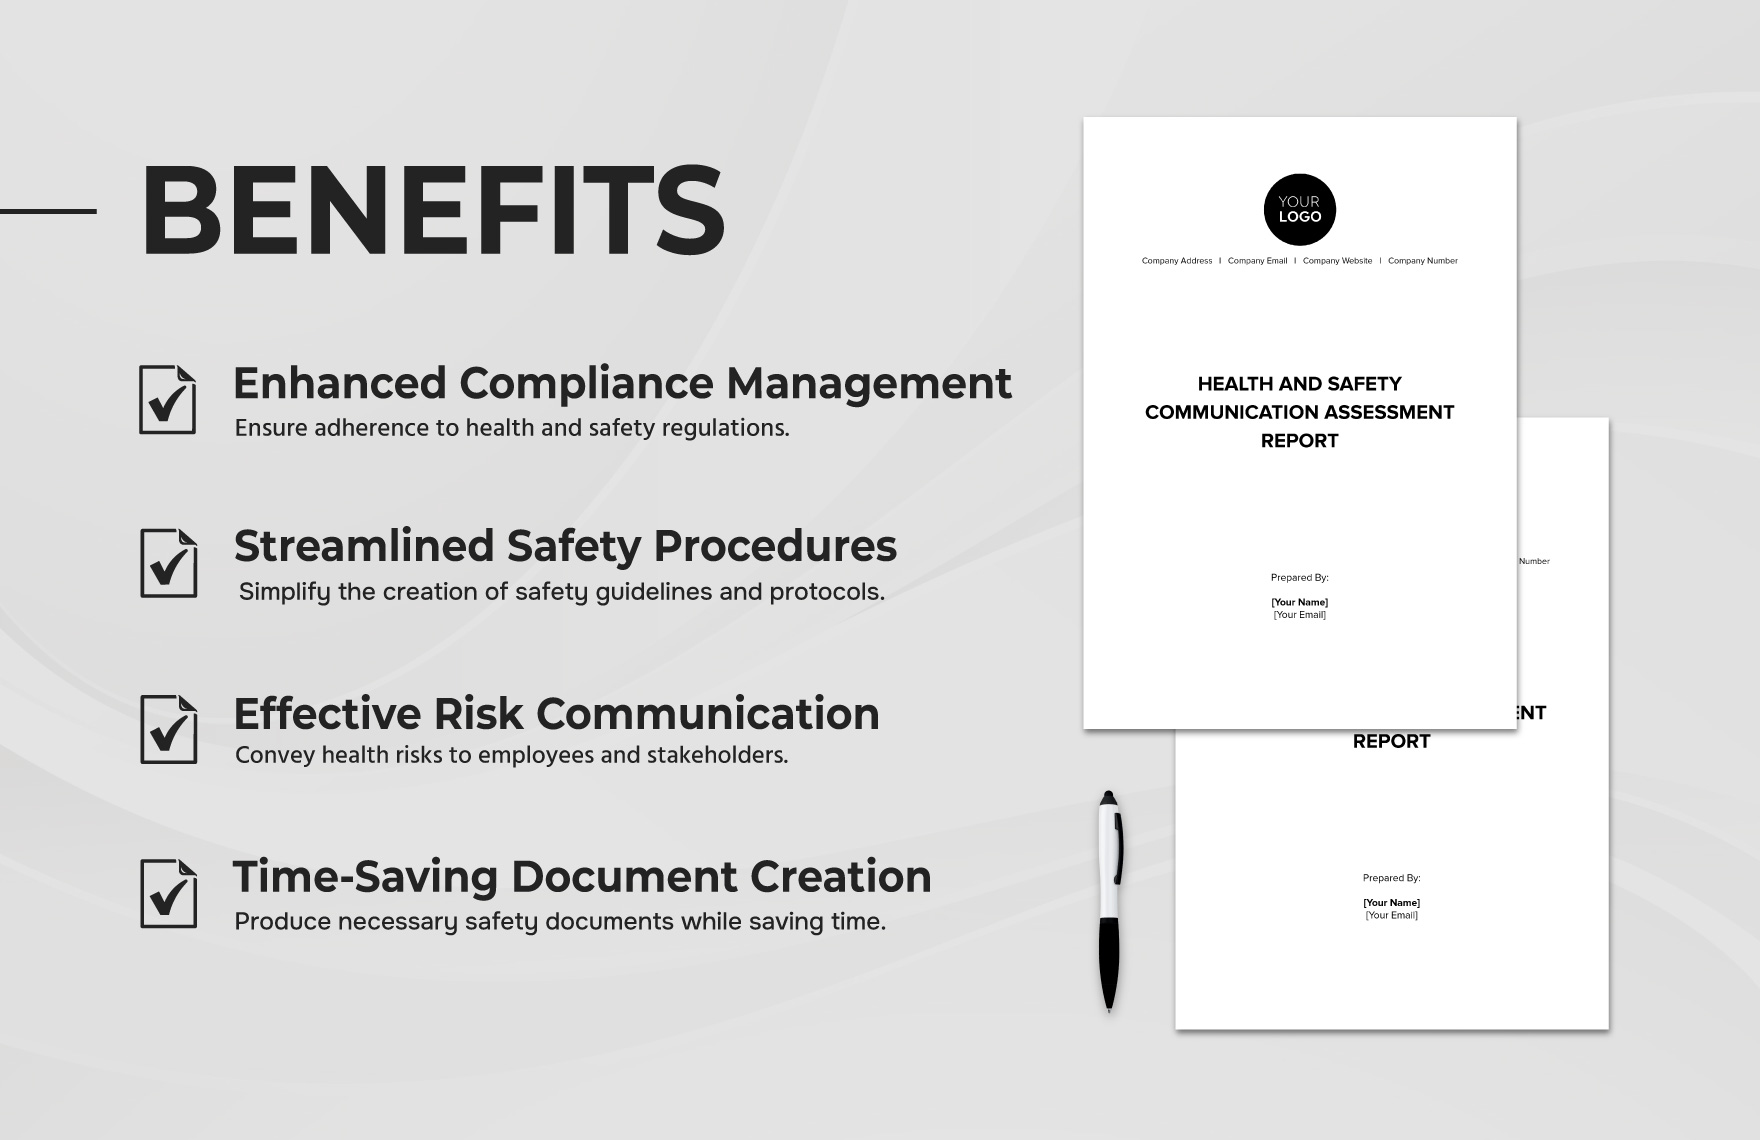 Health & Safety Communication Assessment Report Template